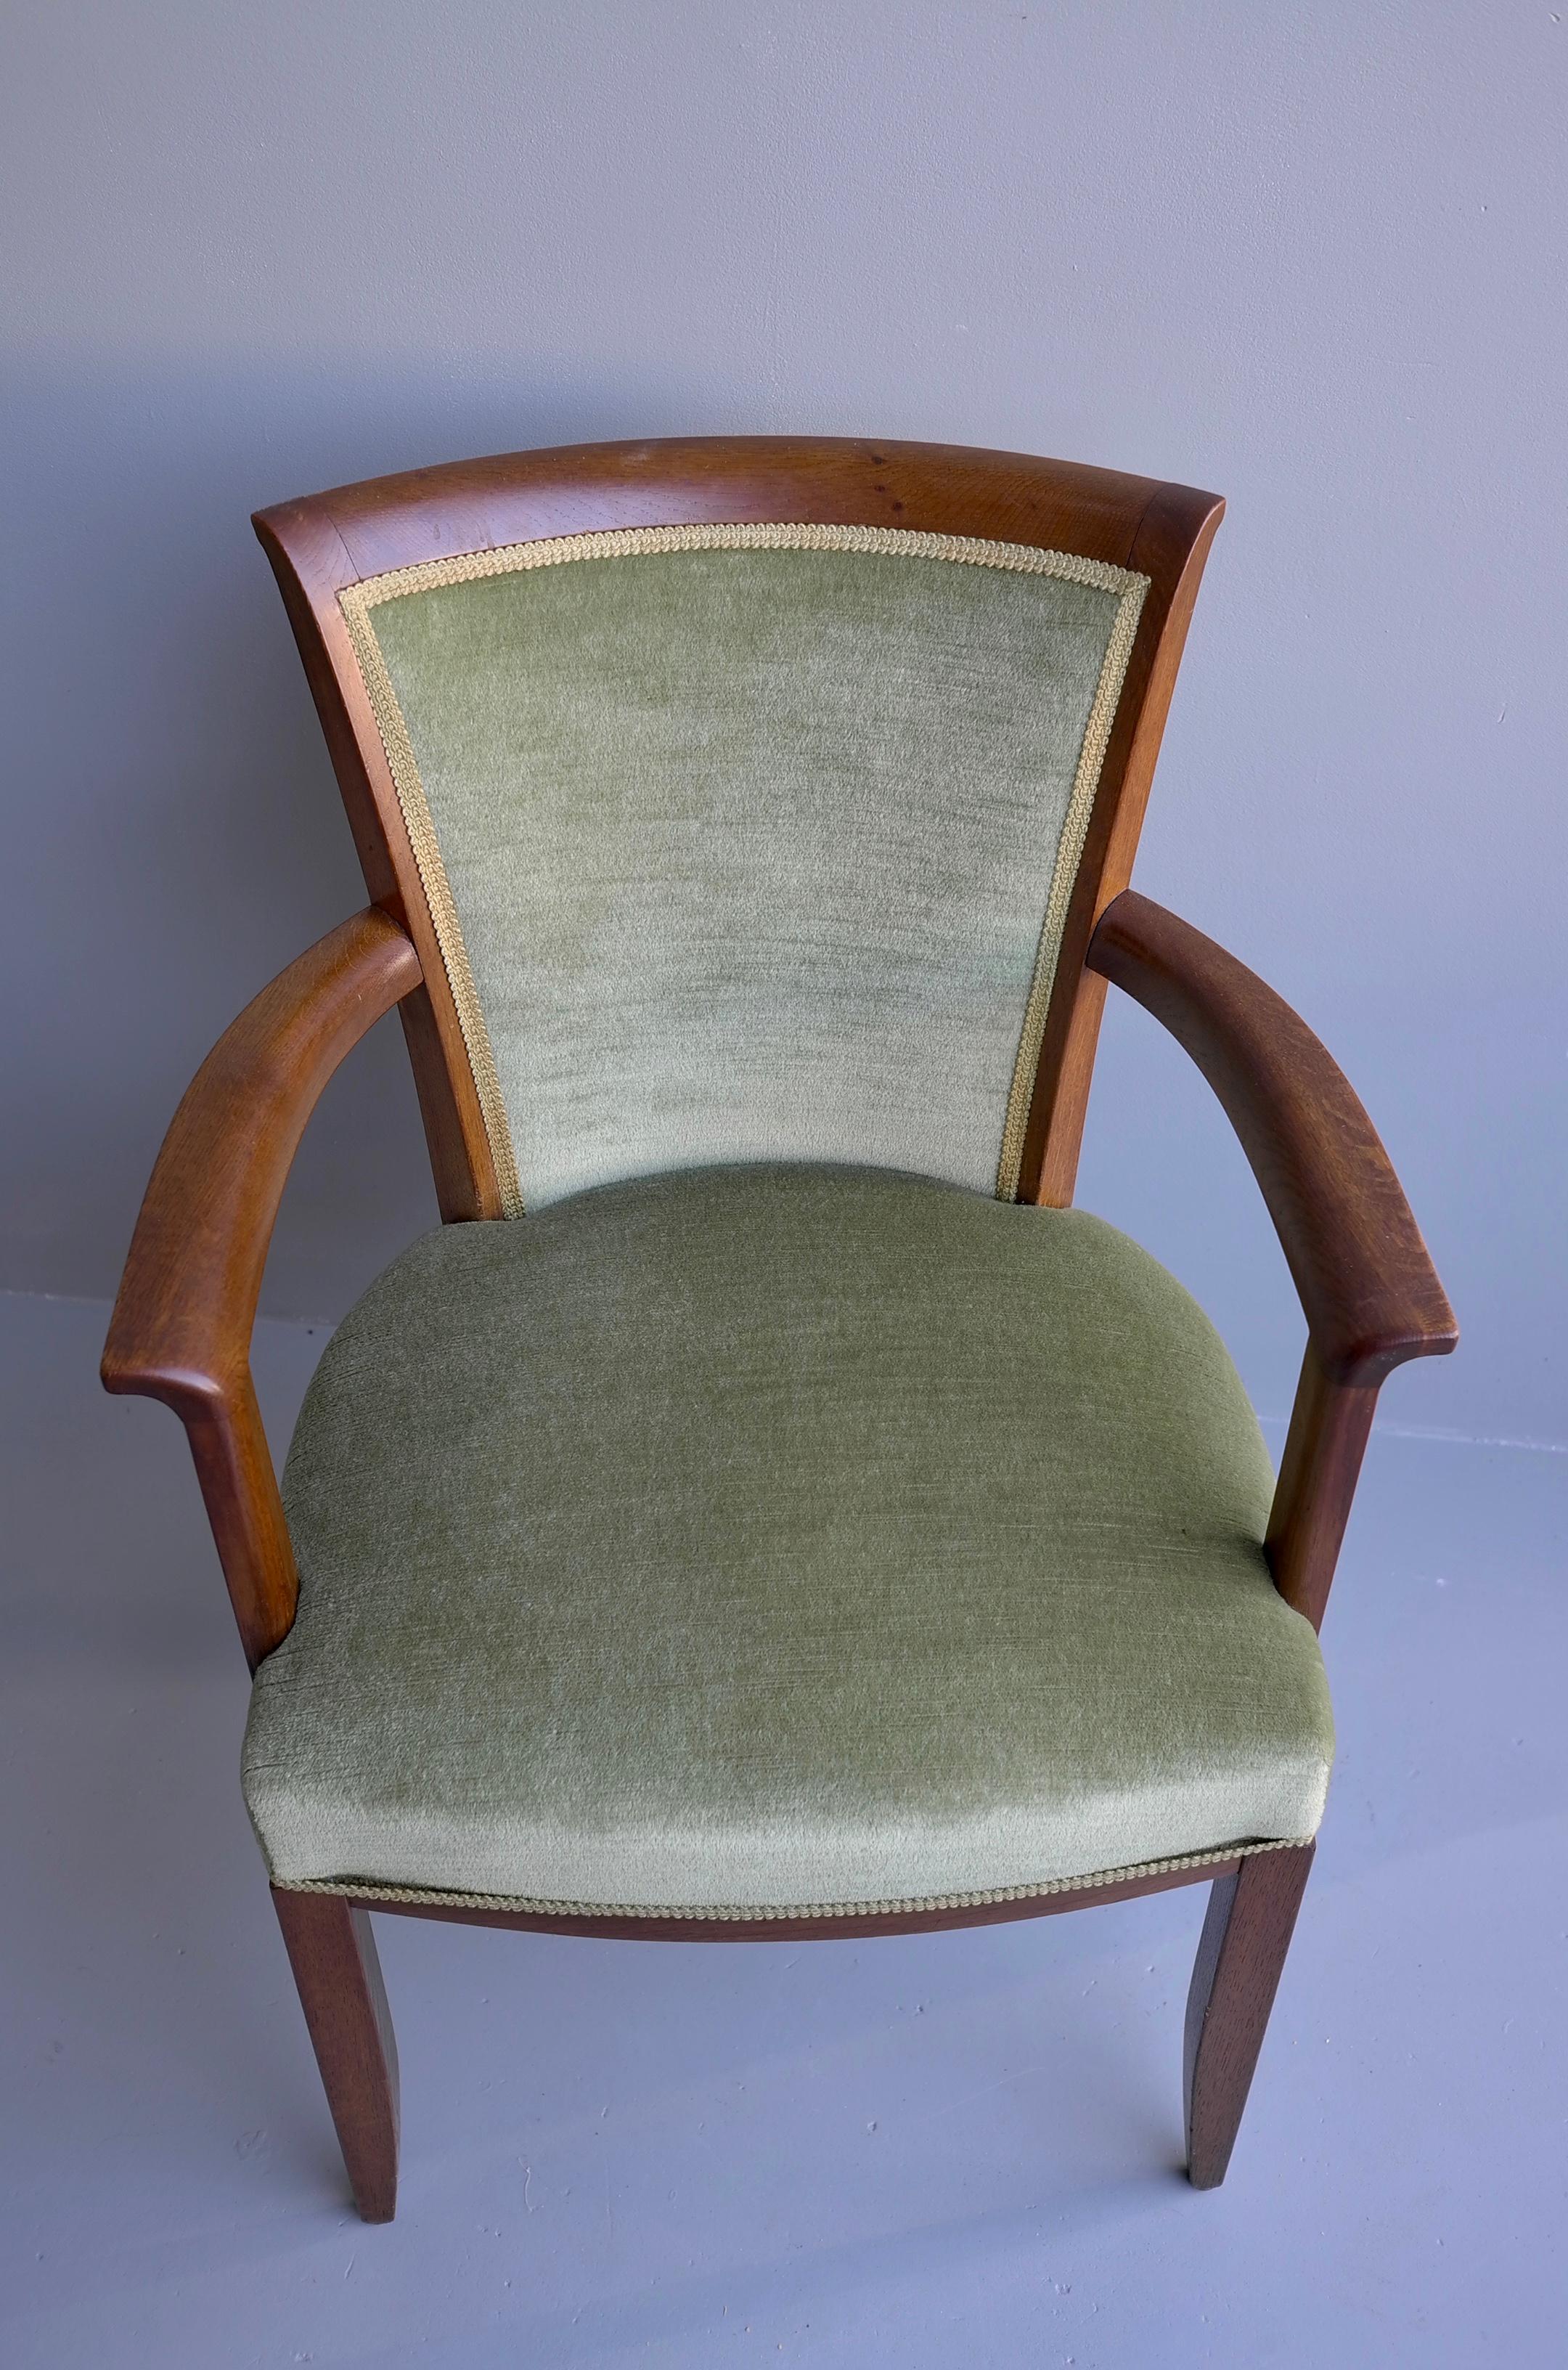 Art Deco Green Velvet Dining Room Chairs by H. Pander & Zonen Netherlands, 1930s For Sale 3